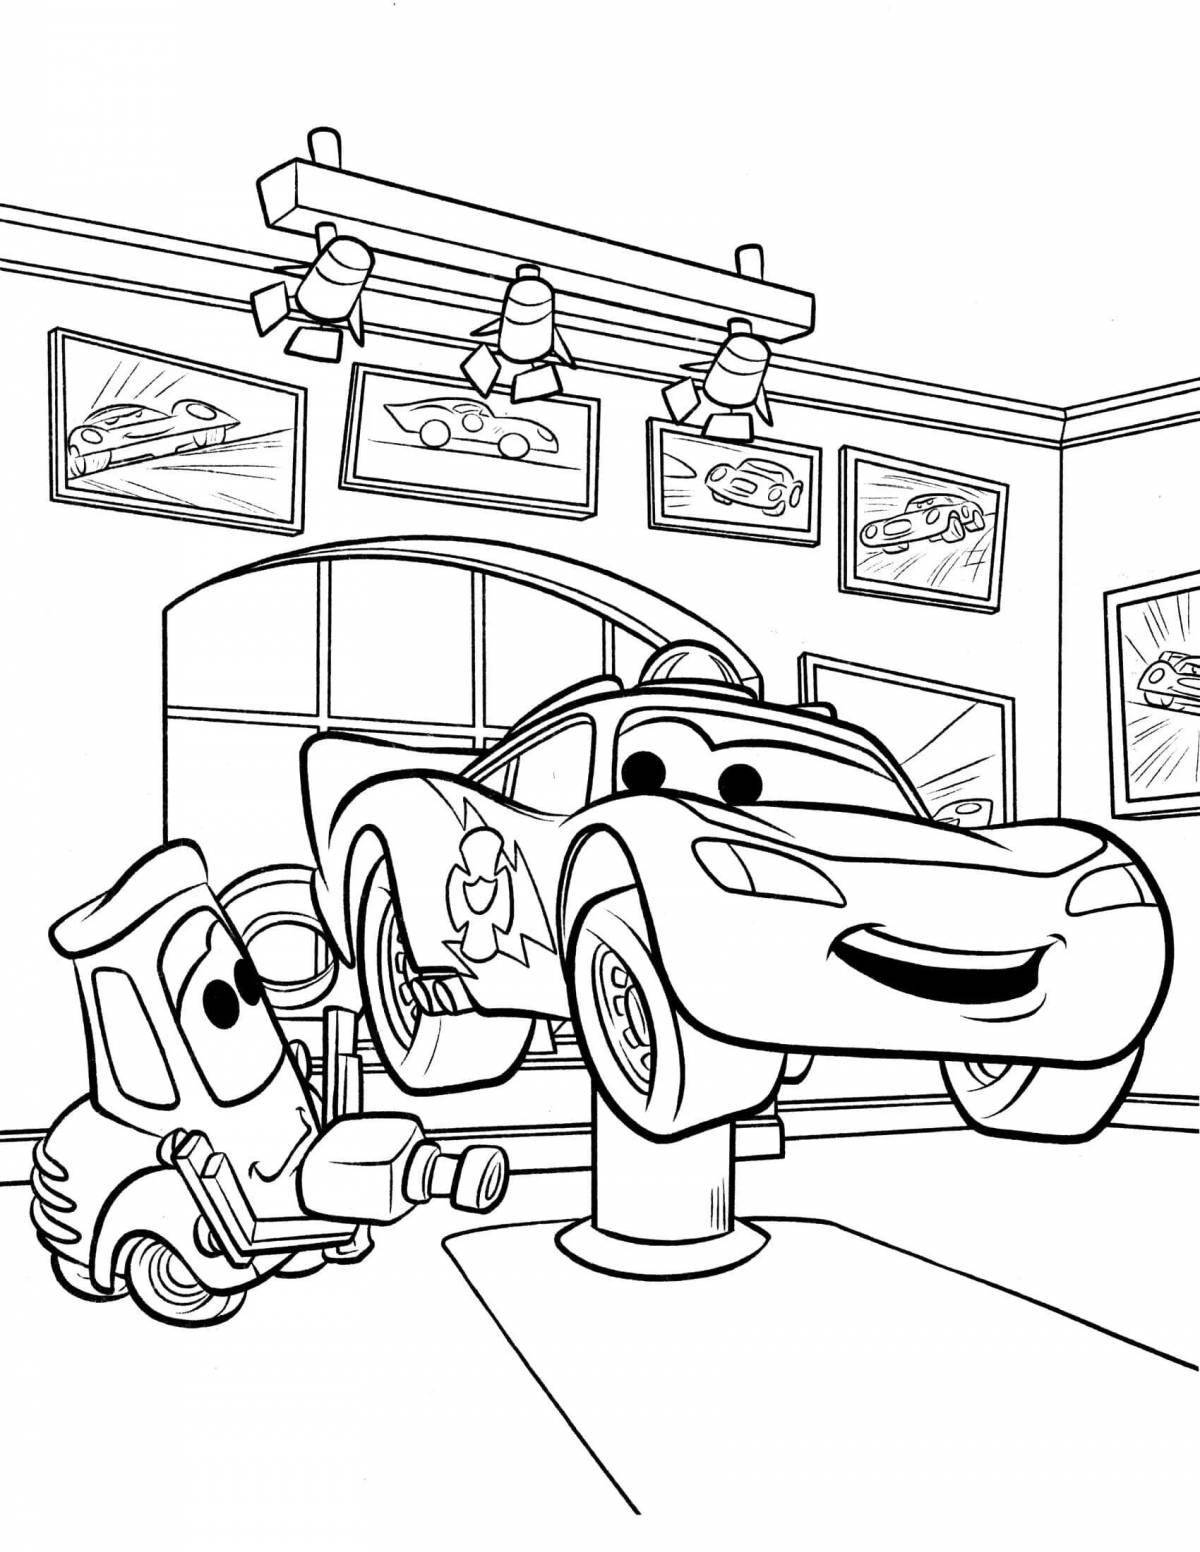 Charming mcqueen coloring page